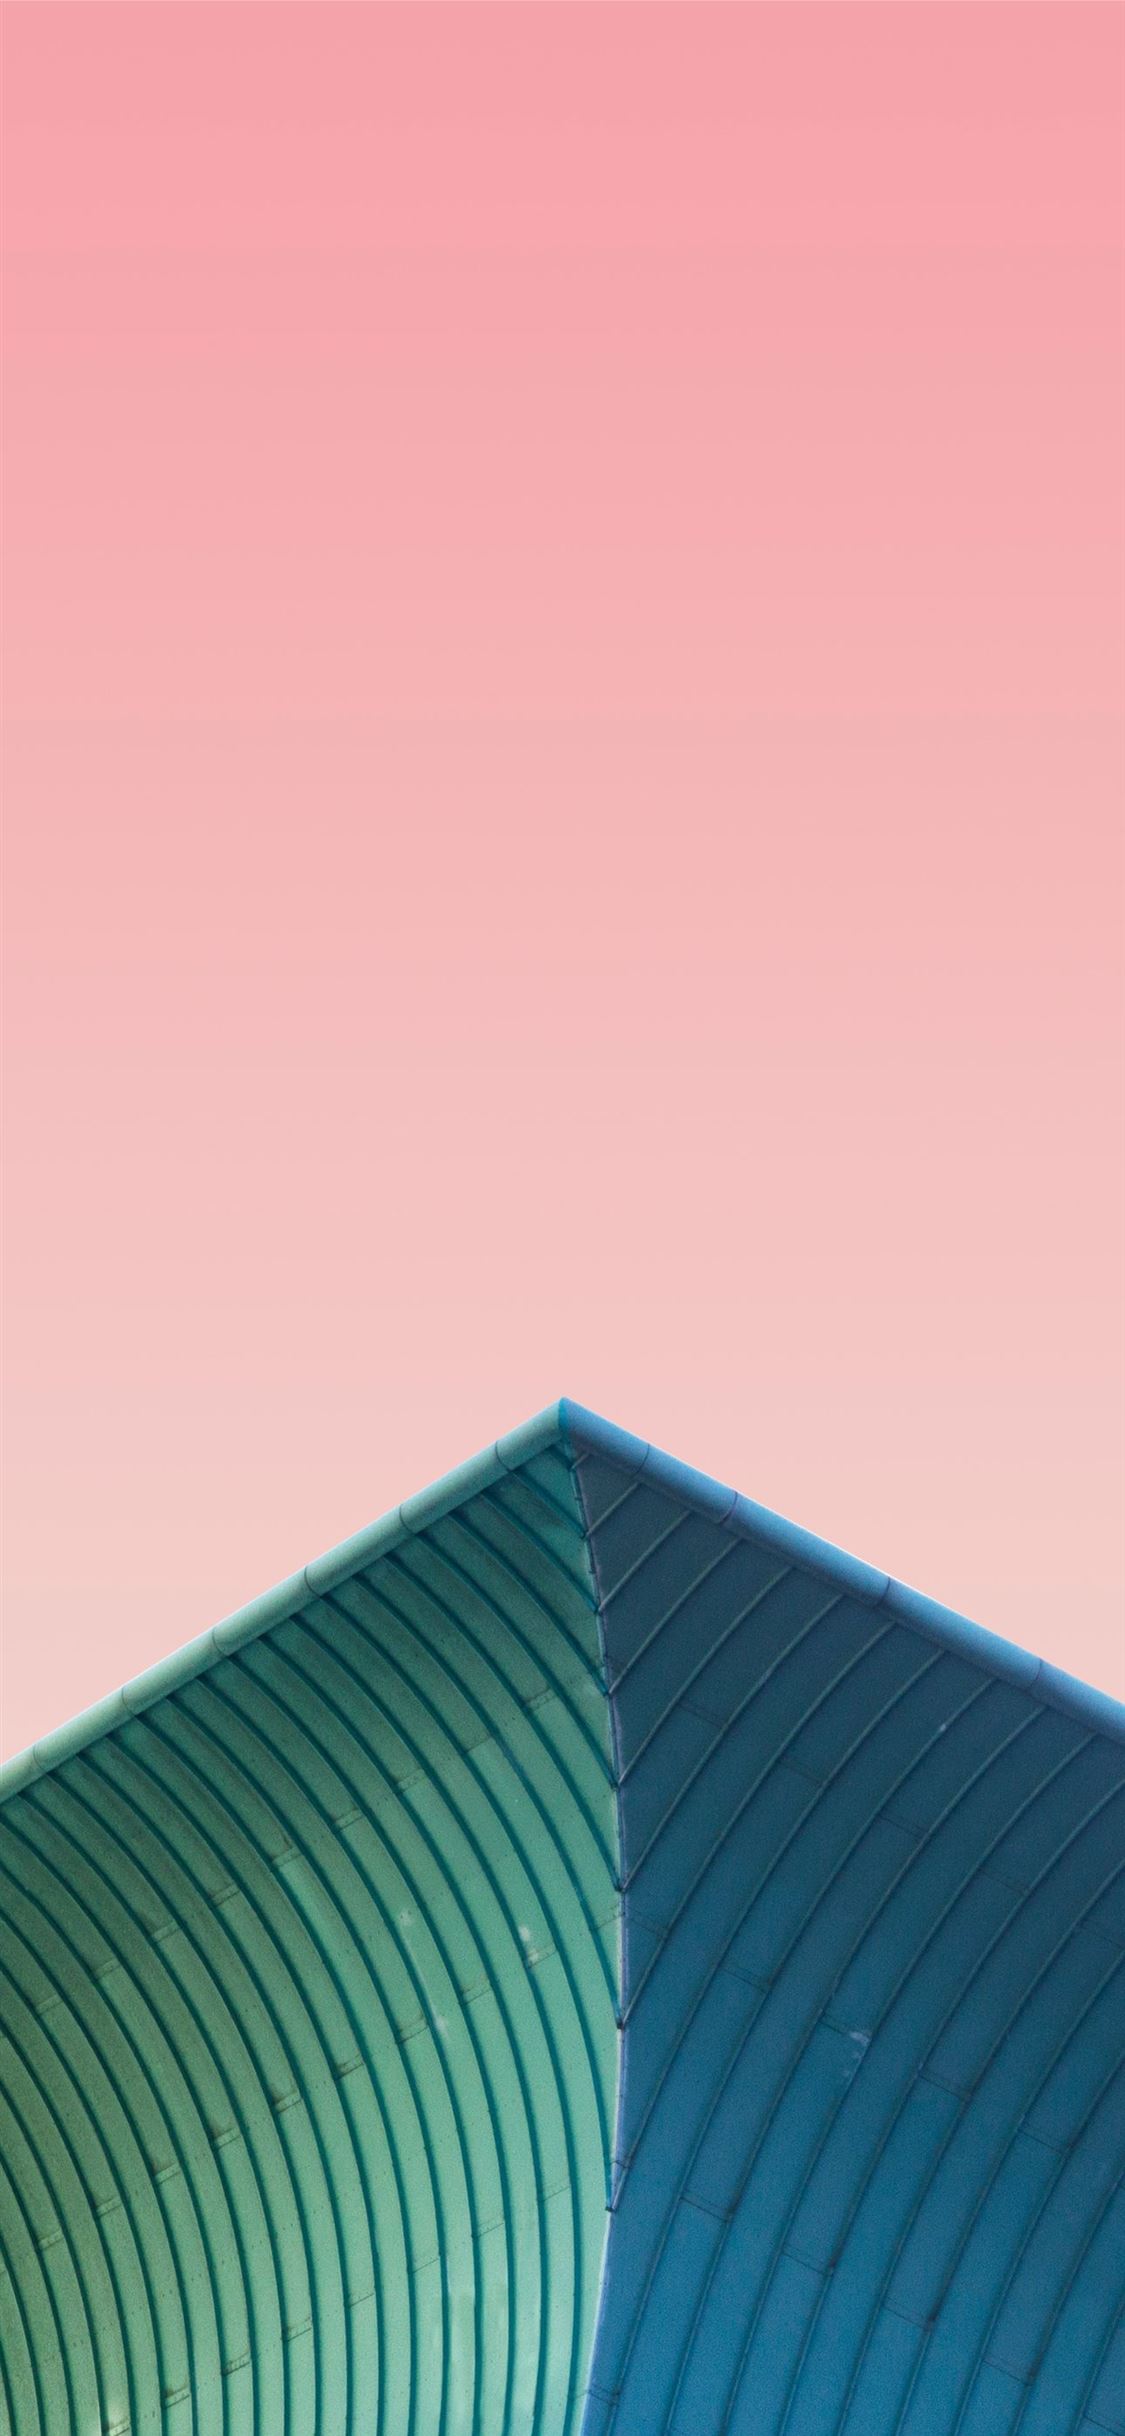 a plane flying over a building with a pink sky in ... iPhone wallpaper 